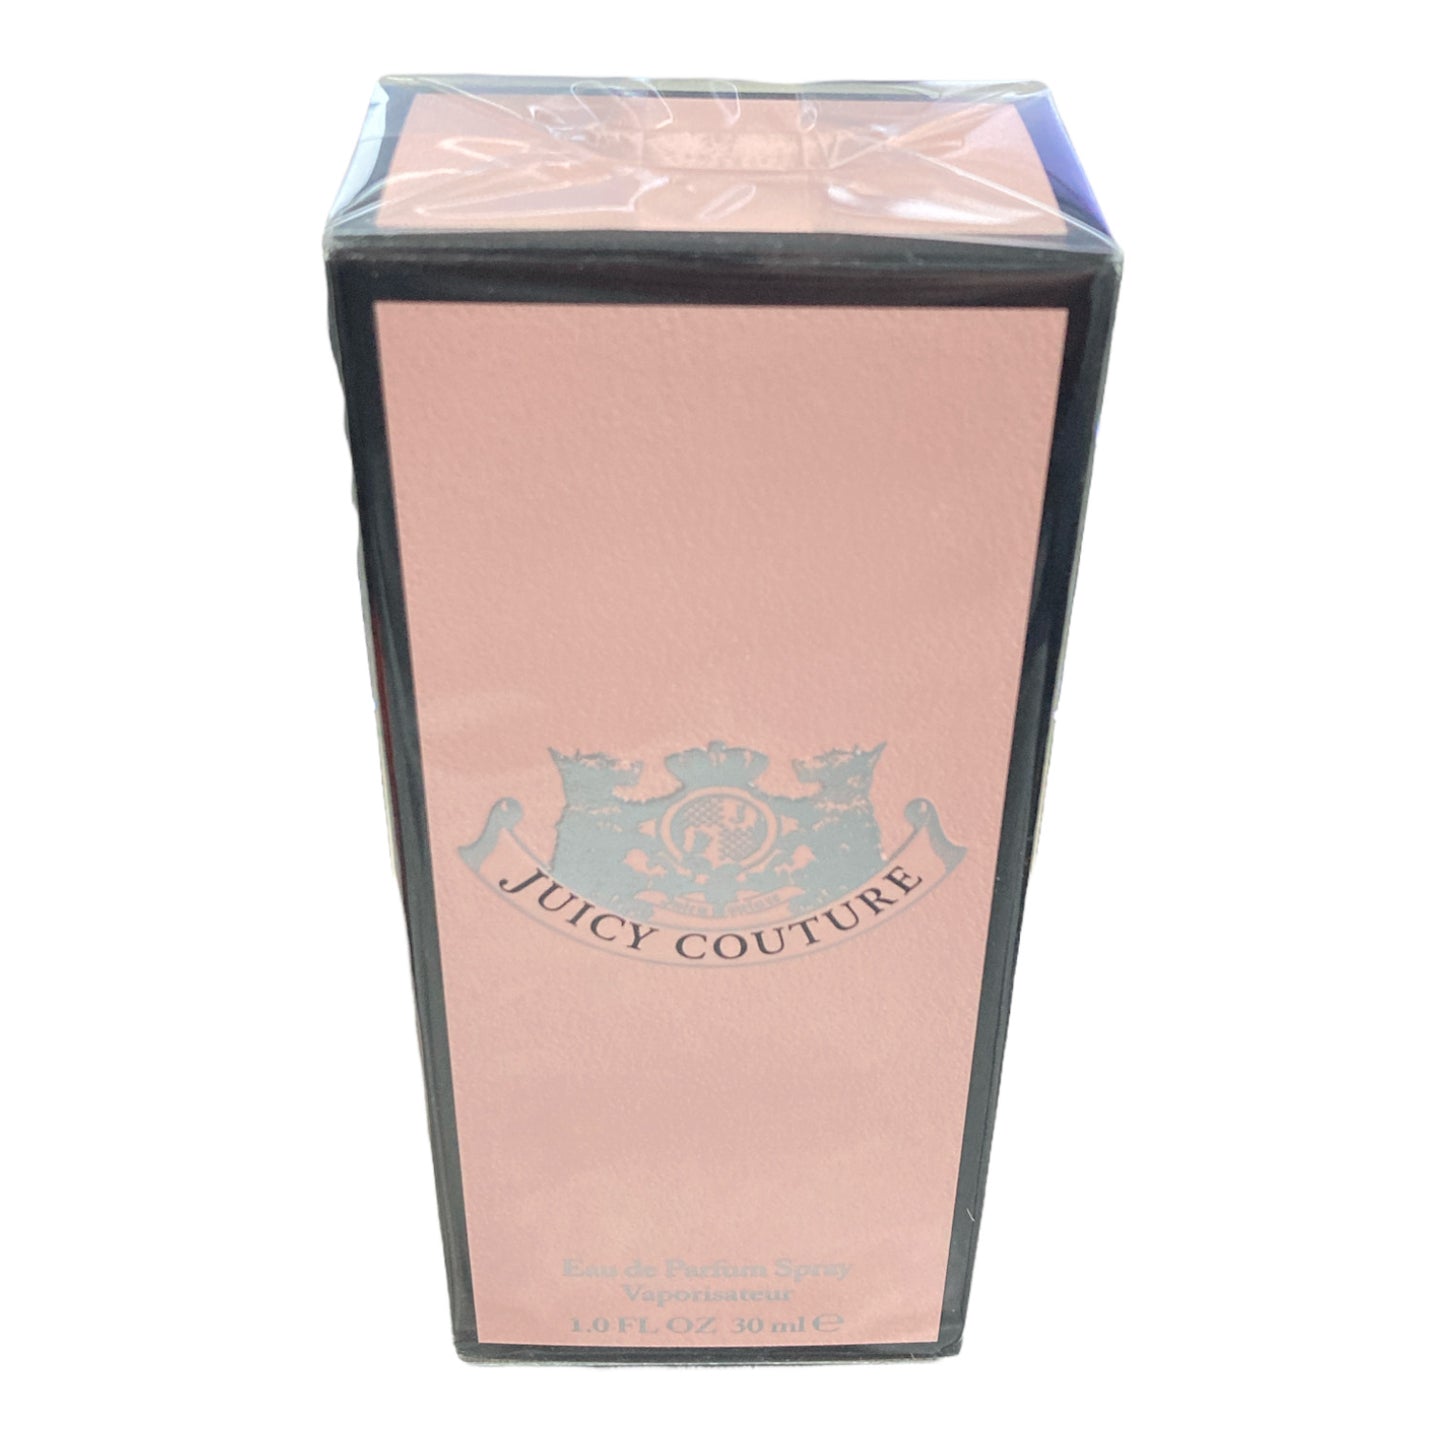 Juicy Couture Perfume by Juicy Couture, 1 oz EDP Spray for Women